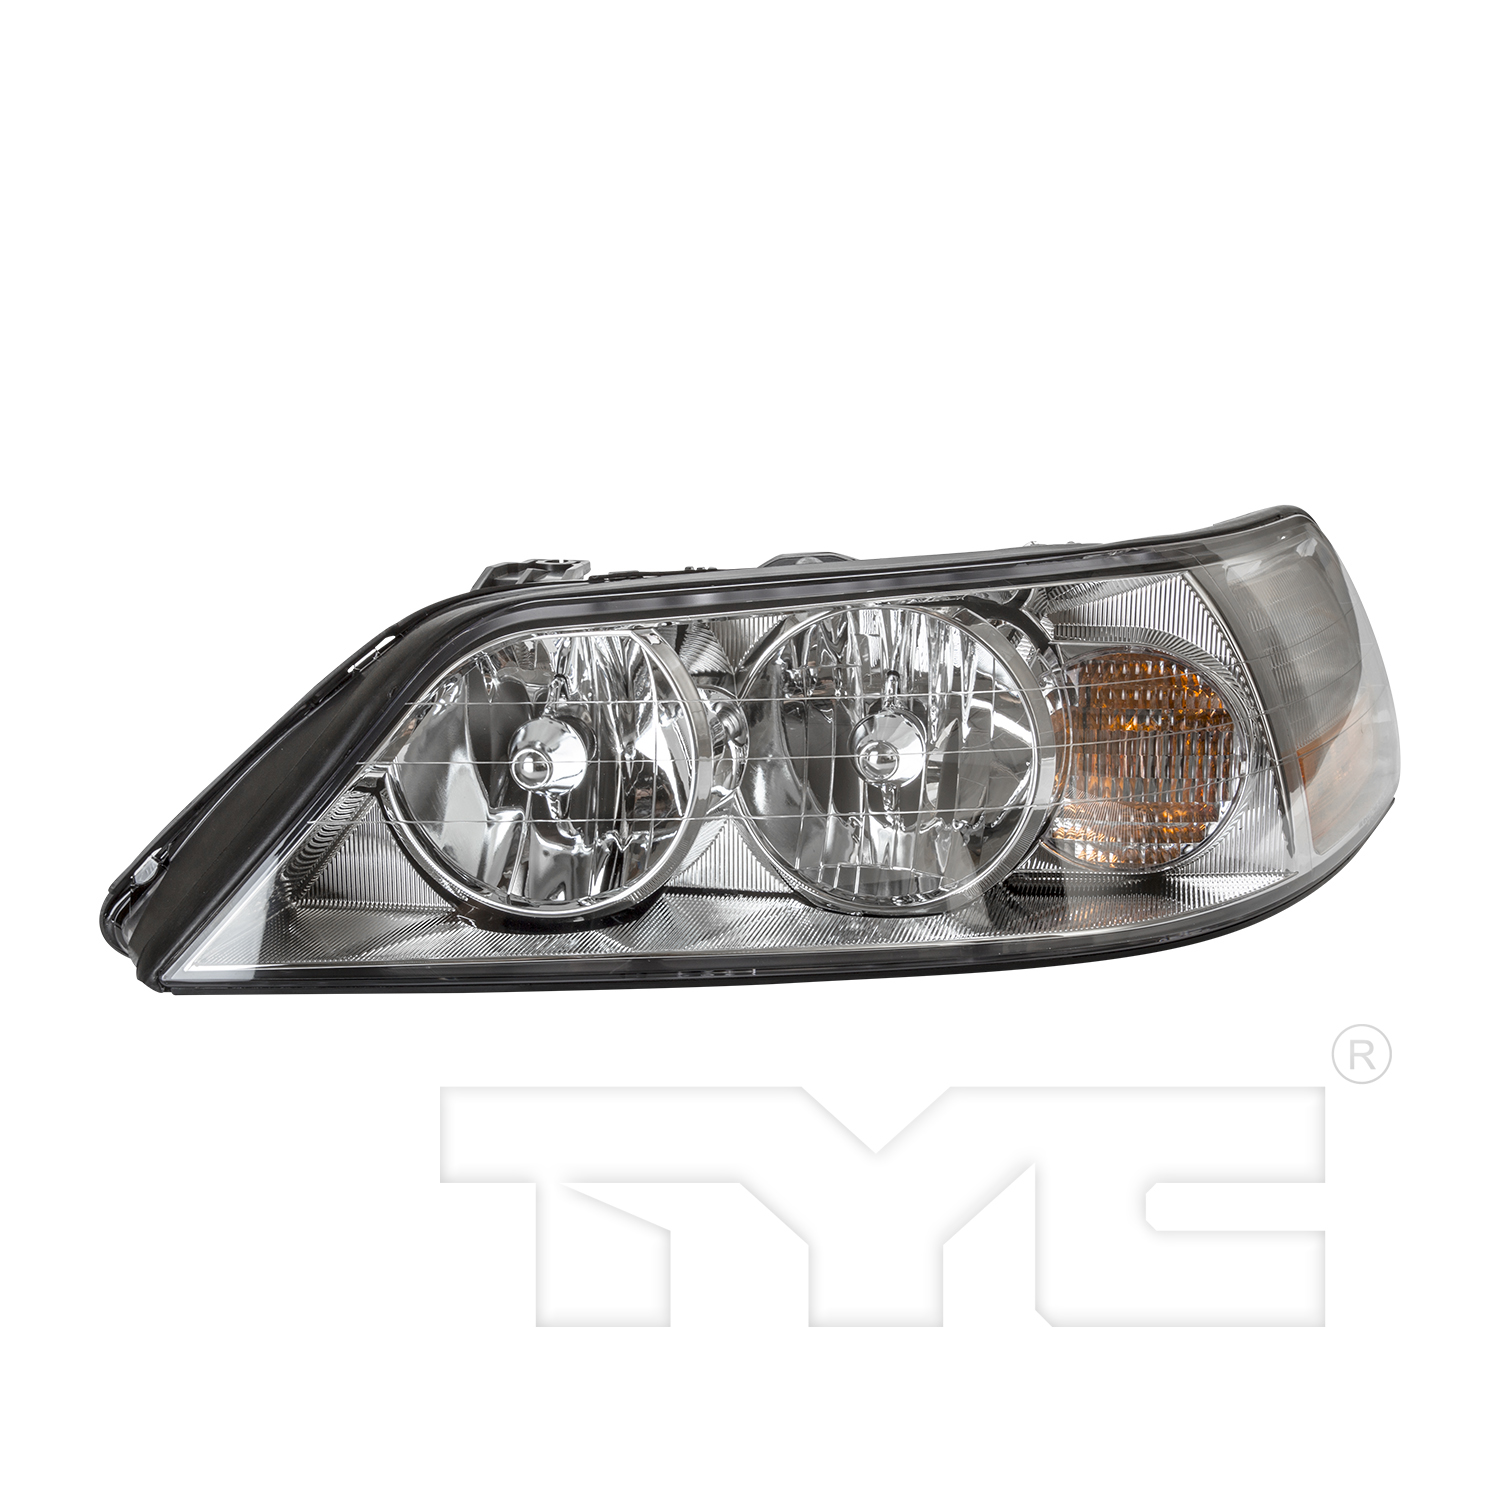 Aftermarket HEADLIGHTS for LINCOLN - TOWN CAR, TOWN CAR,03-04,LT Headlamp assy composite